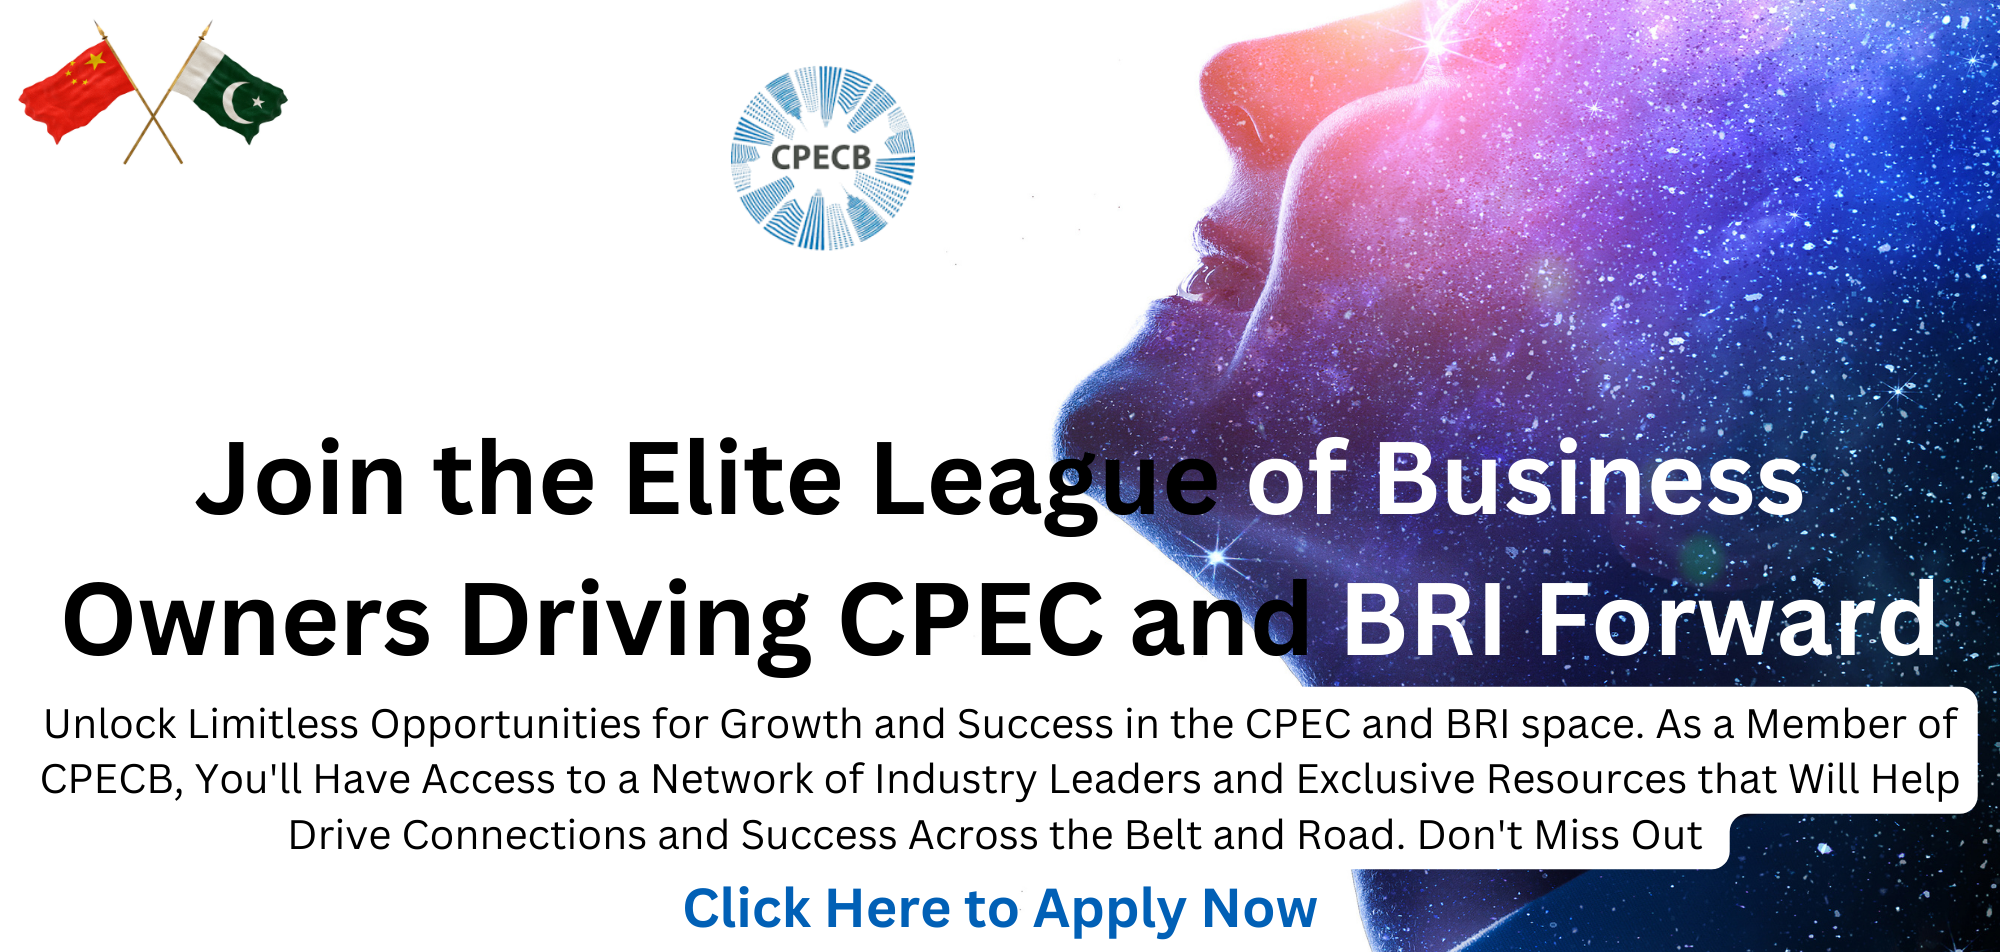 Join the elite league of successful business owners with CPECB